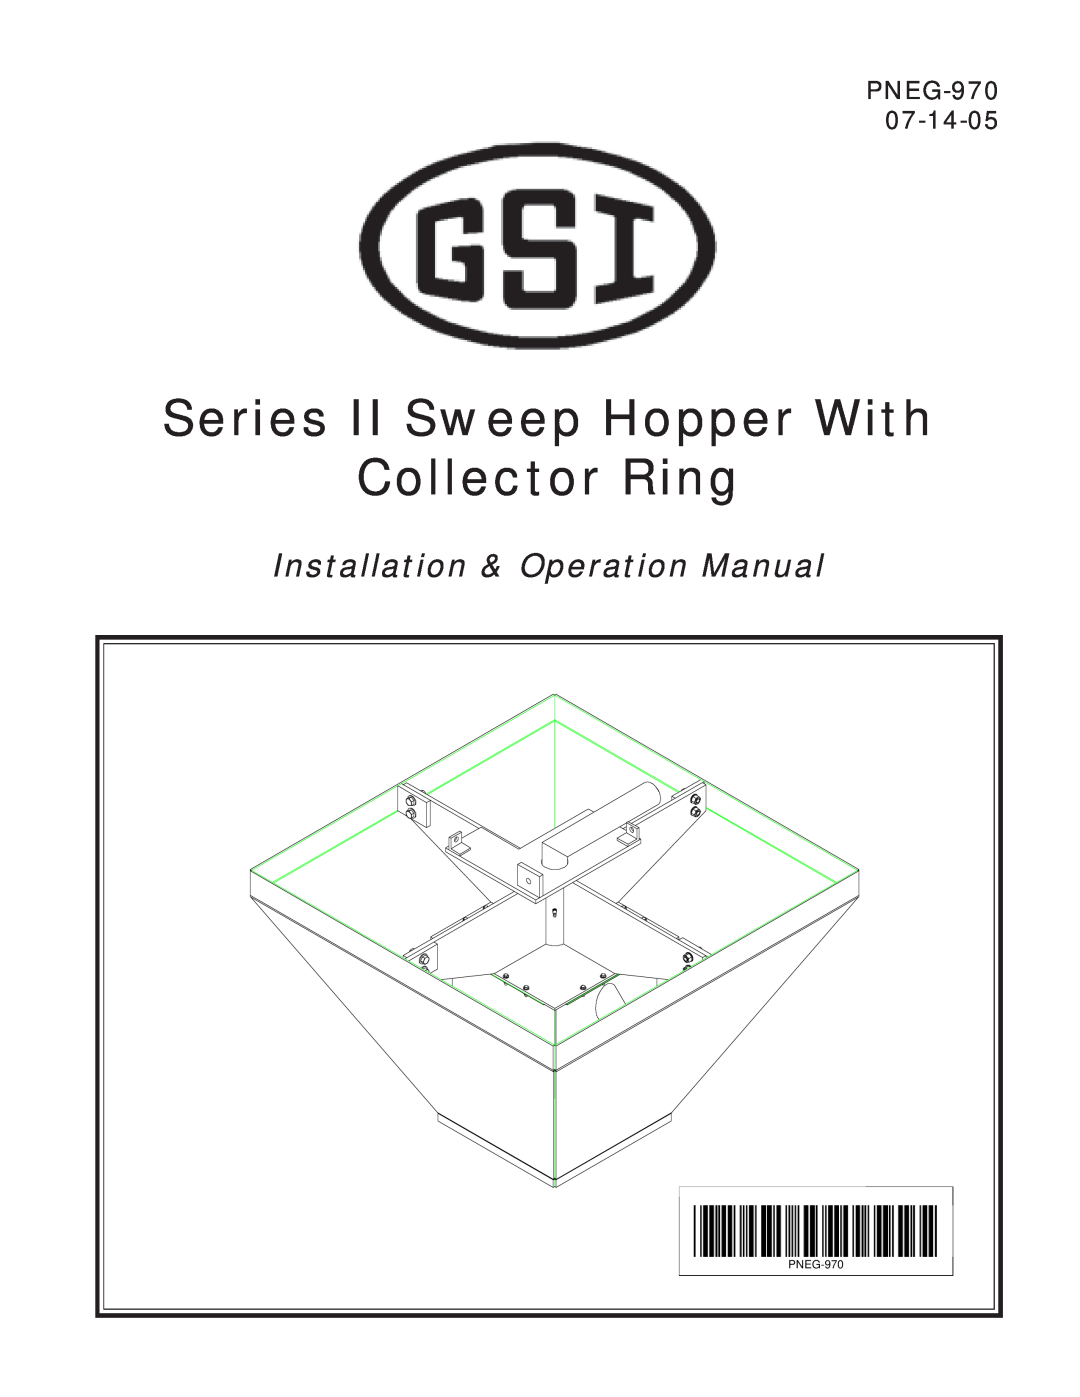 GSI Outdoors PNEG-970 operation manual Series II Sweep Hopper With Collector Ring 